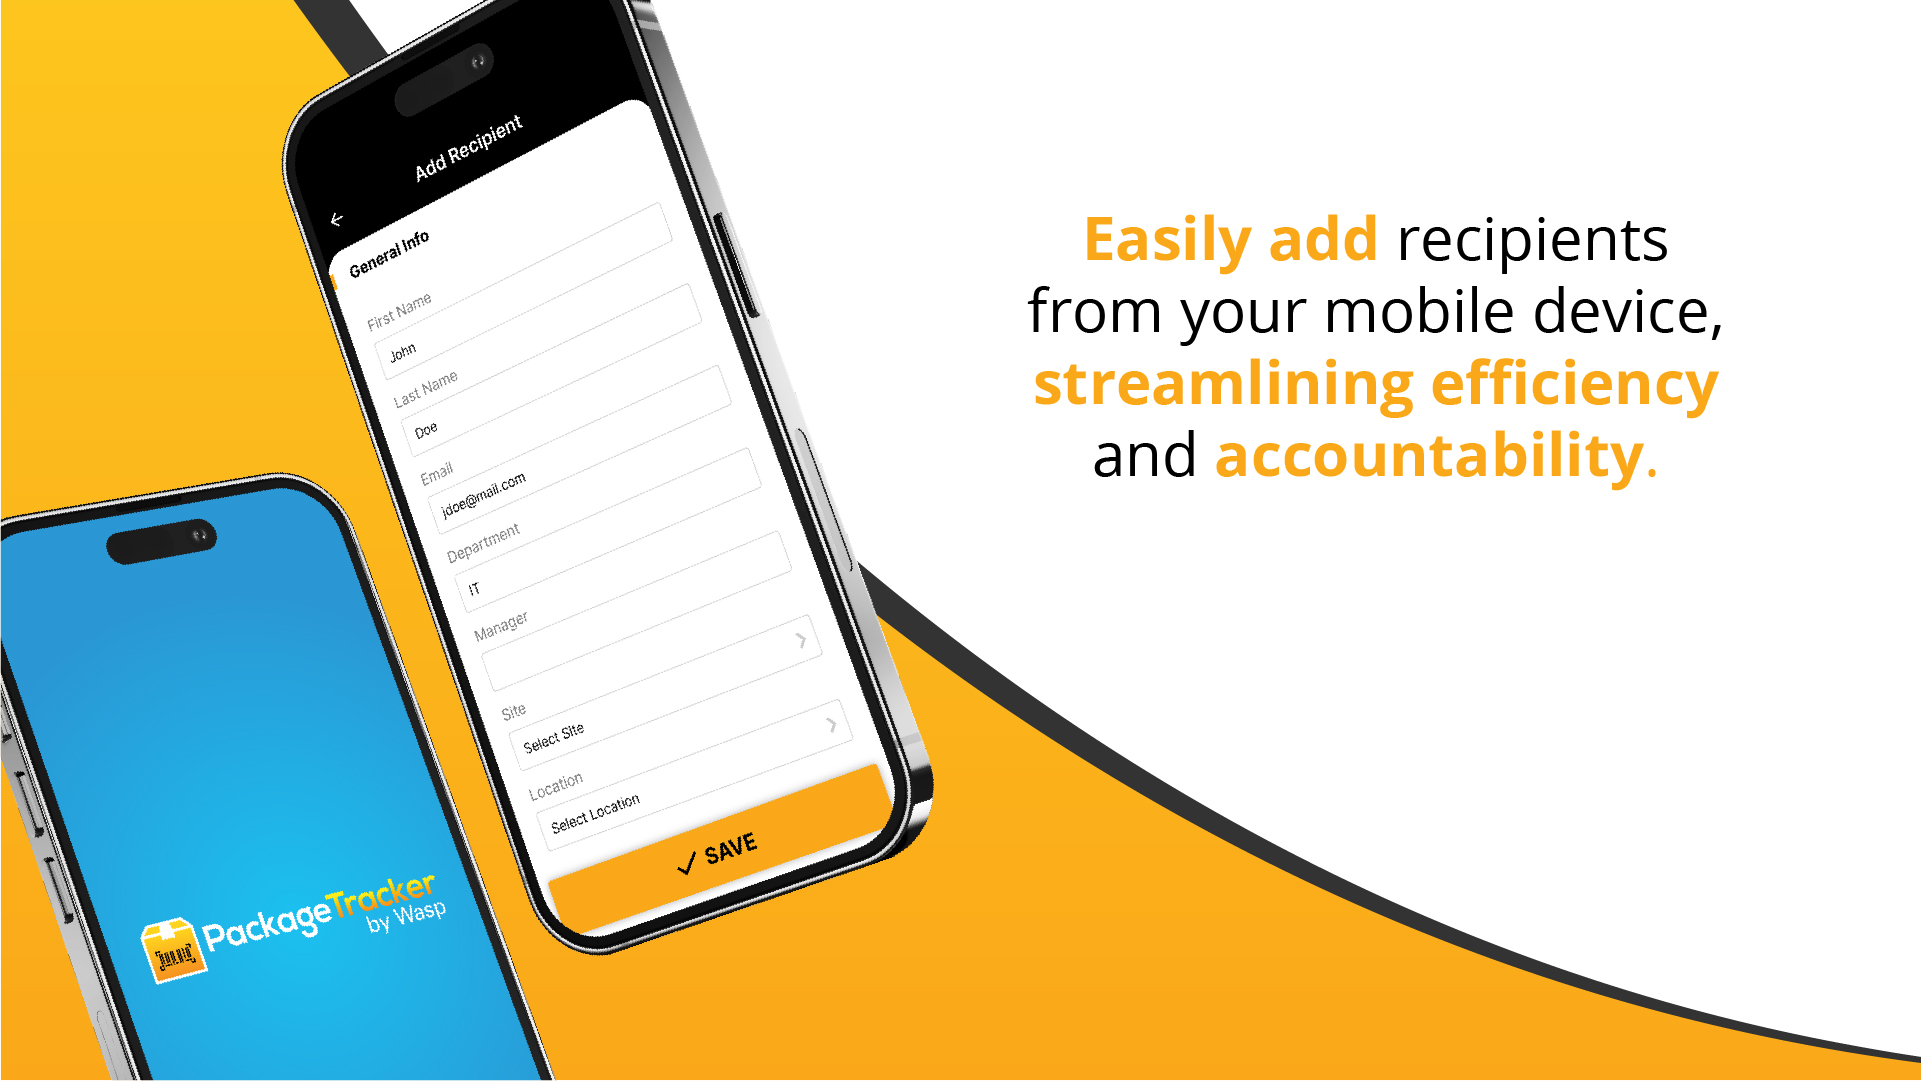 Easily add recipients from your mobile device, streamlining efficiency and accountability